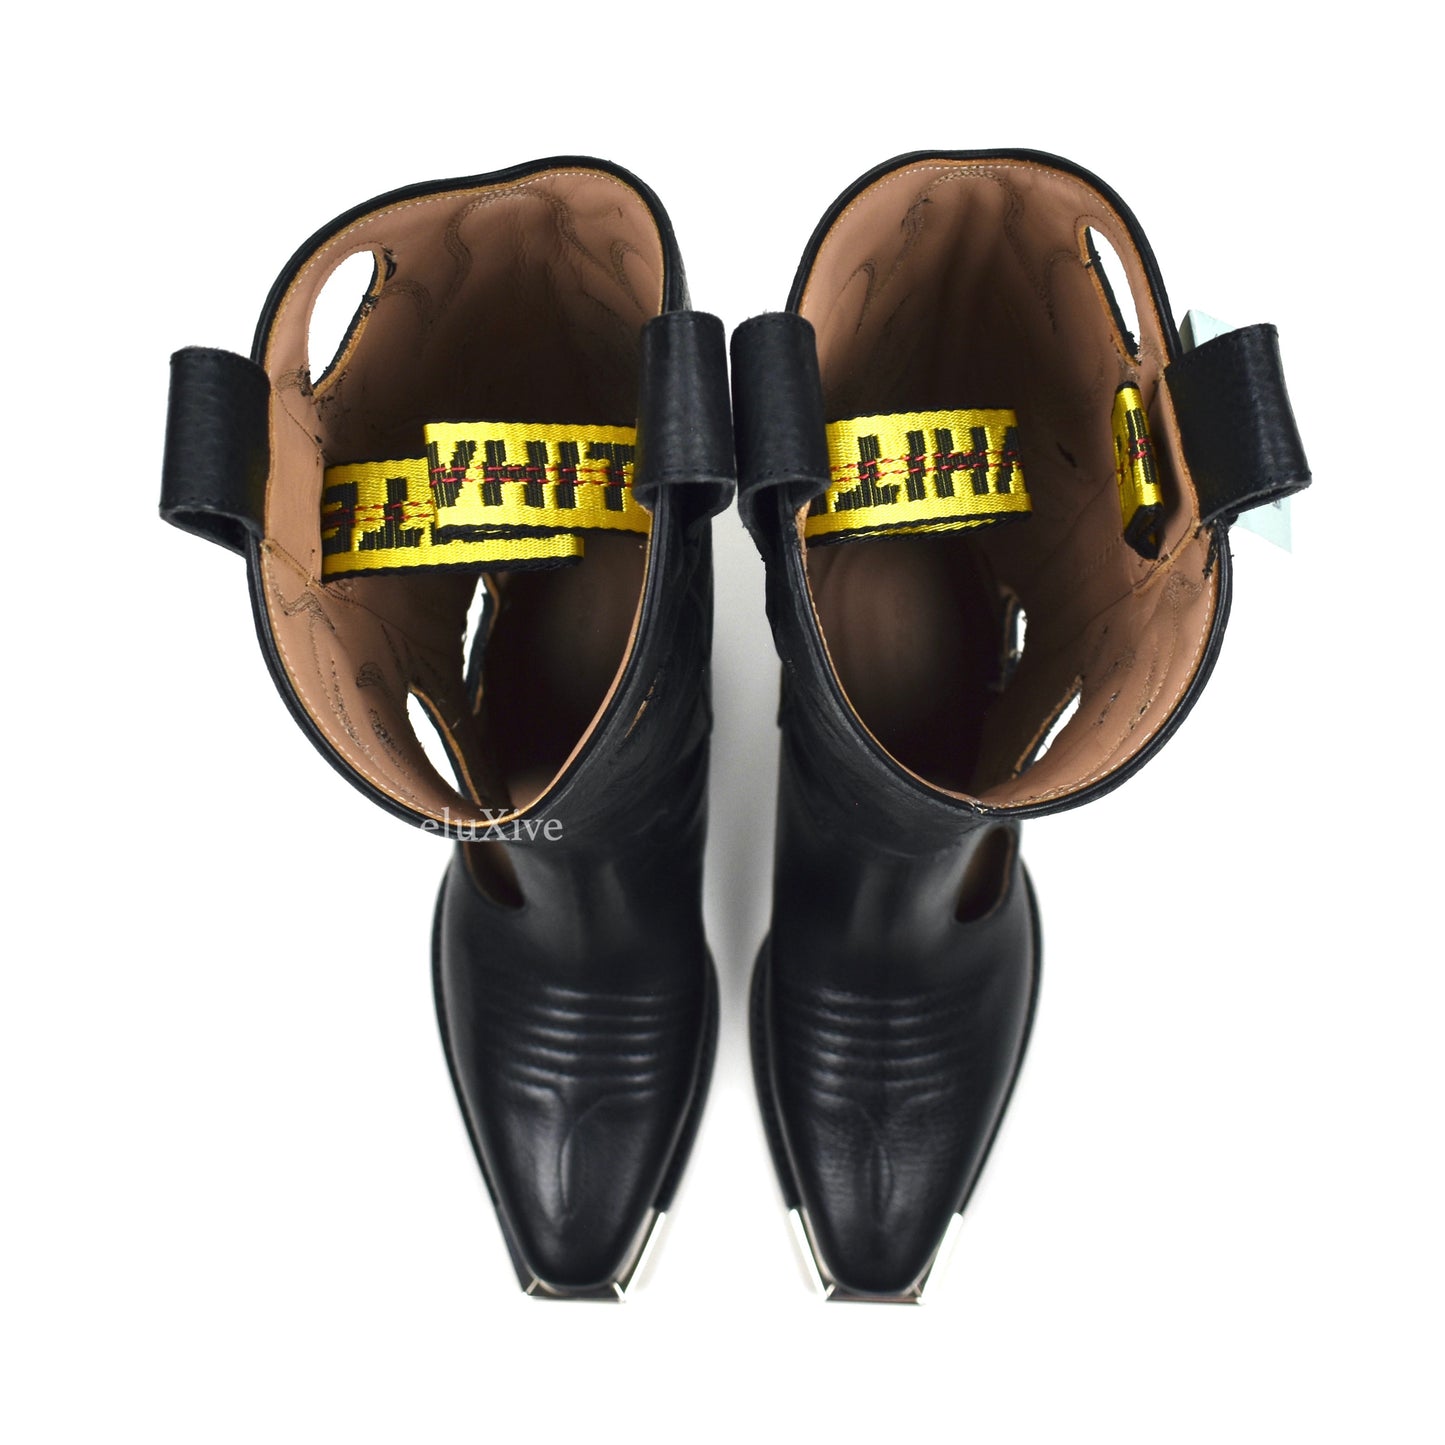 Off-White - Black Leather "FOR WALKING" Meteor Cowboy Boots